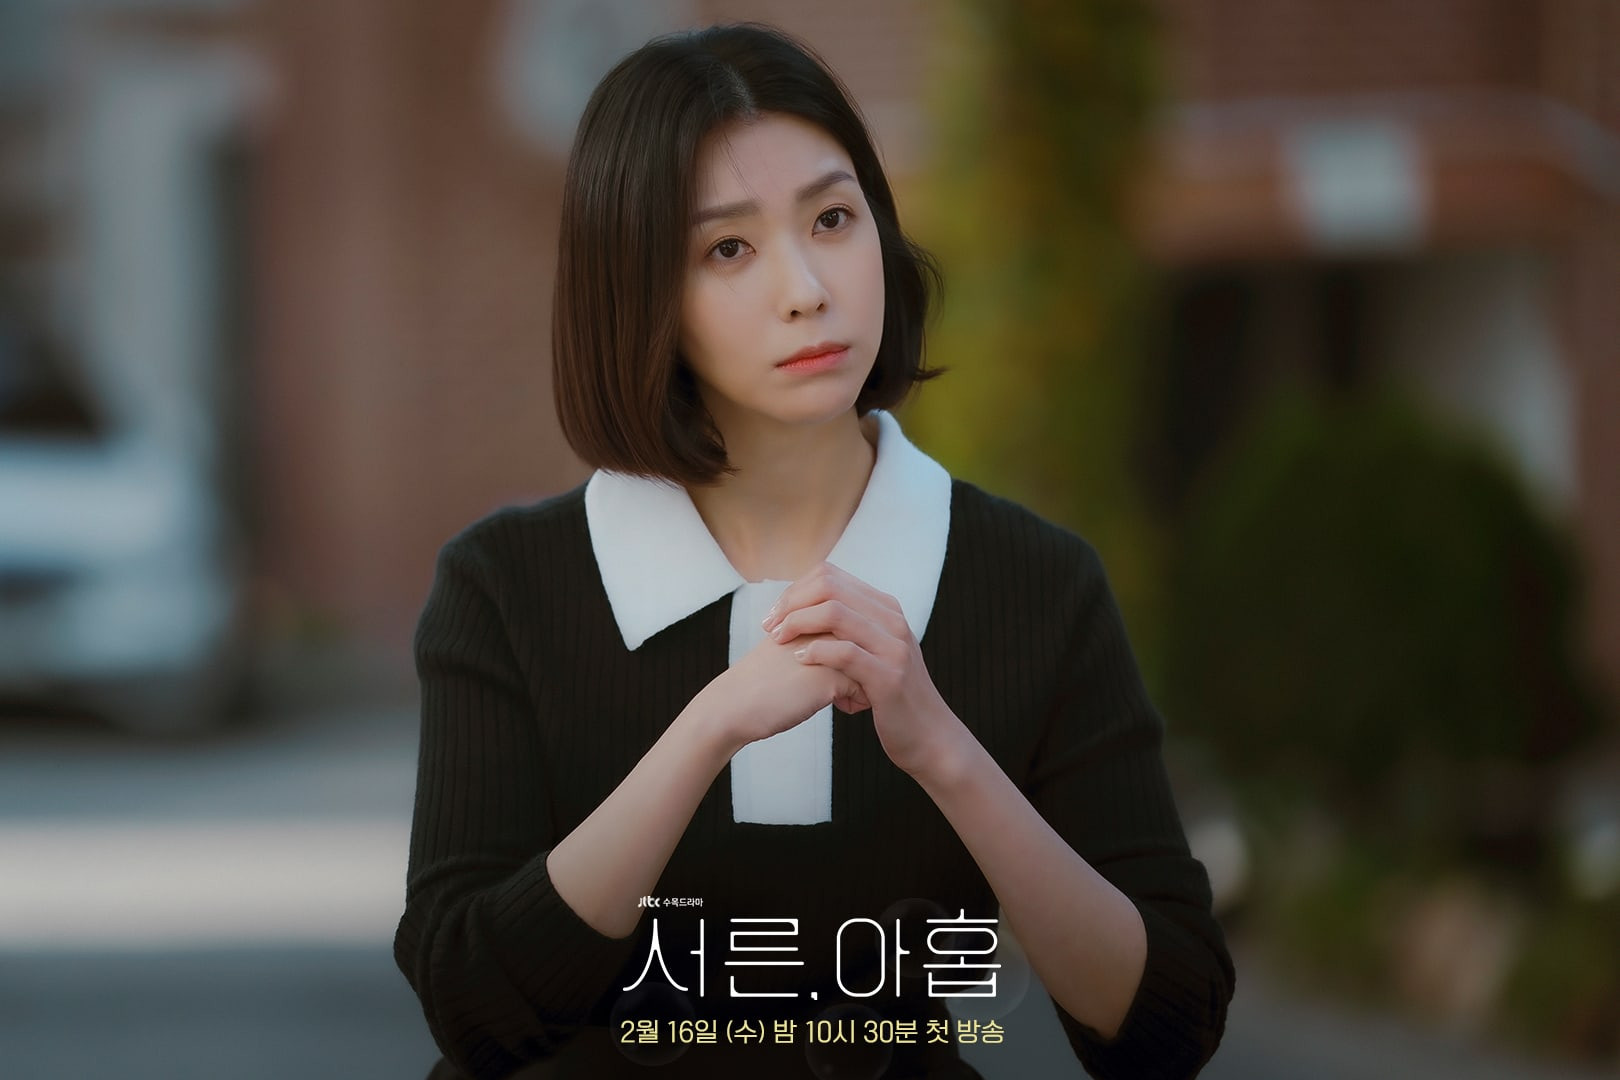 Kim Ji Hyun Gives An In-Depth Look Into Her Timid But Loveable Character In  New Drama “Thirty-Nine” | Soompi